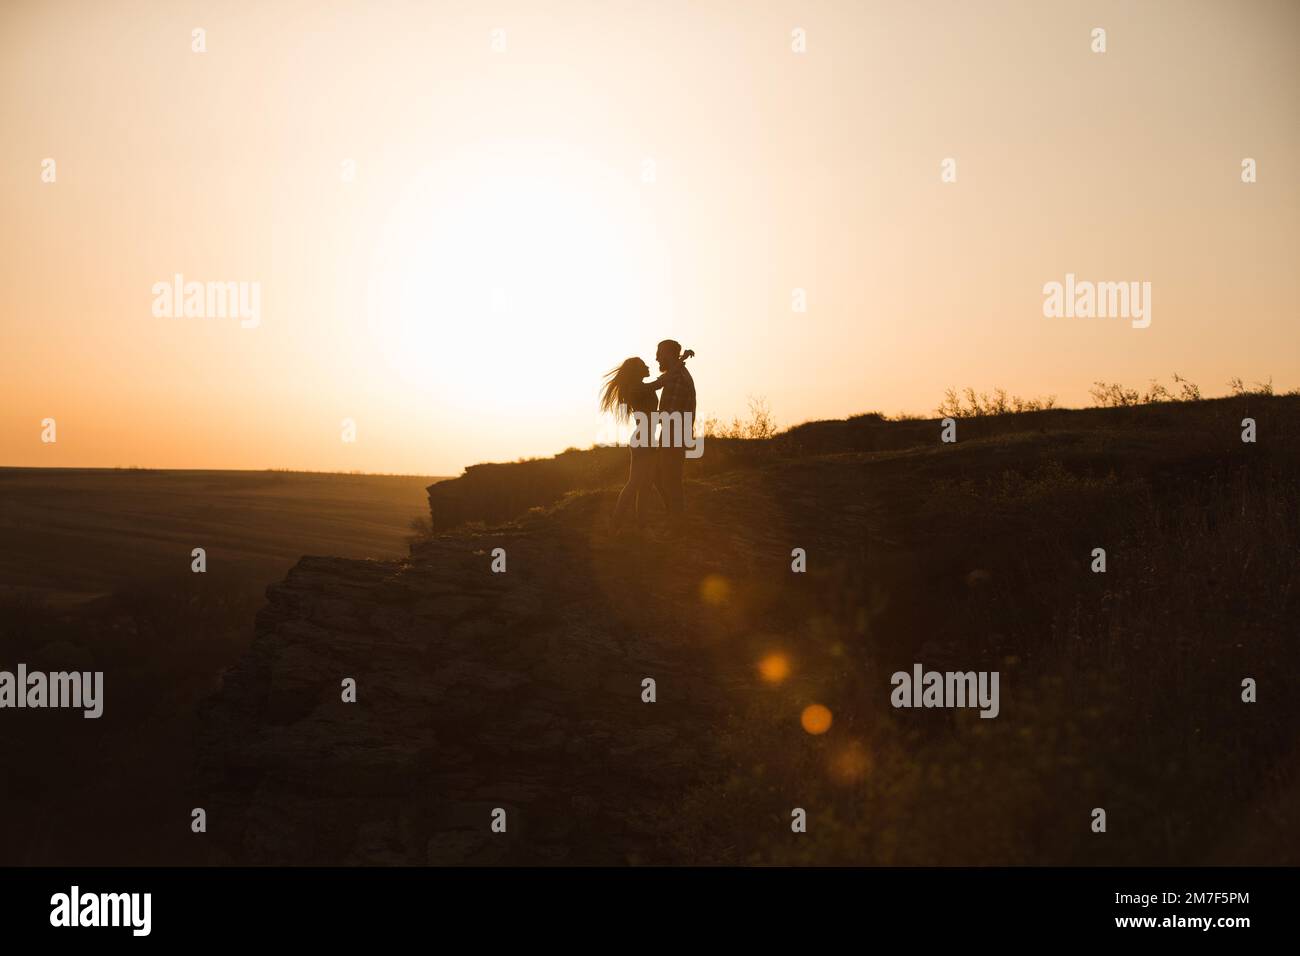 Bearded man and red-haired woman stand embracing at sunset. Stock Photo